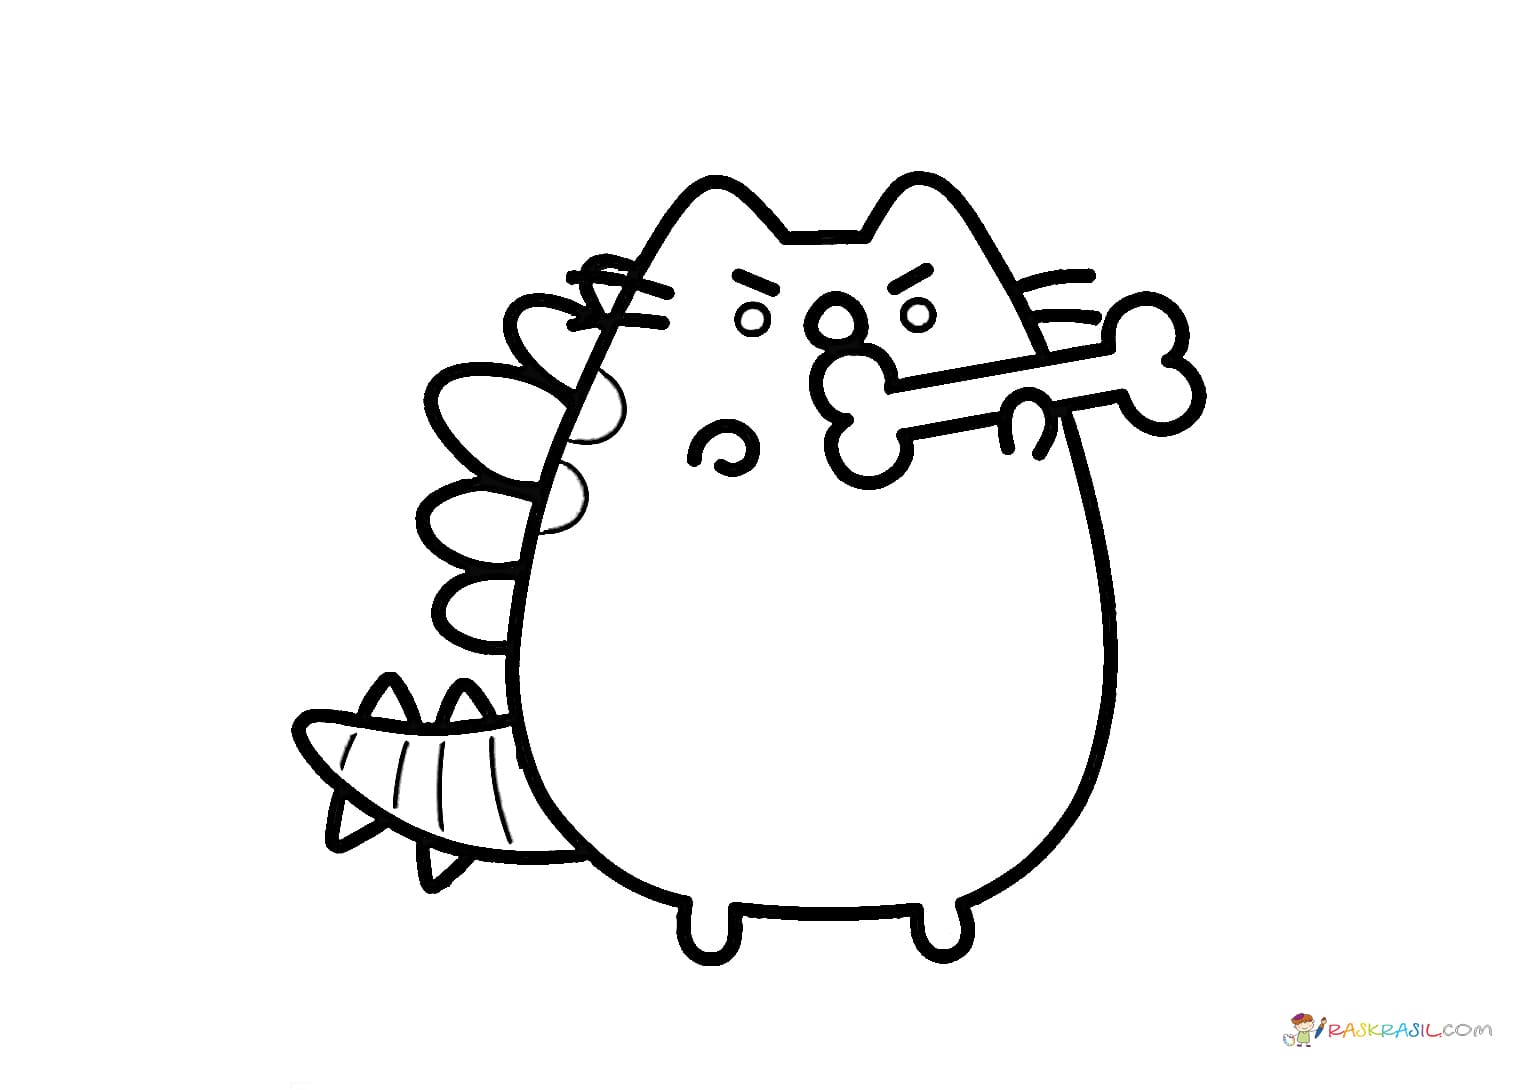 Pusheen Coloring Pages. Print Them Online for Free!